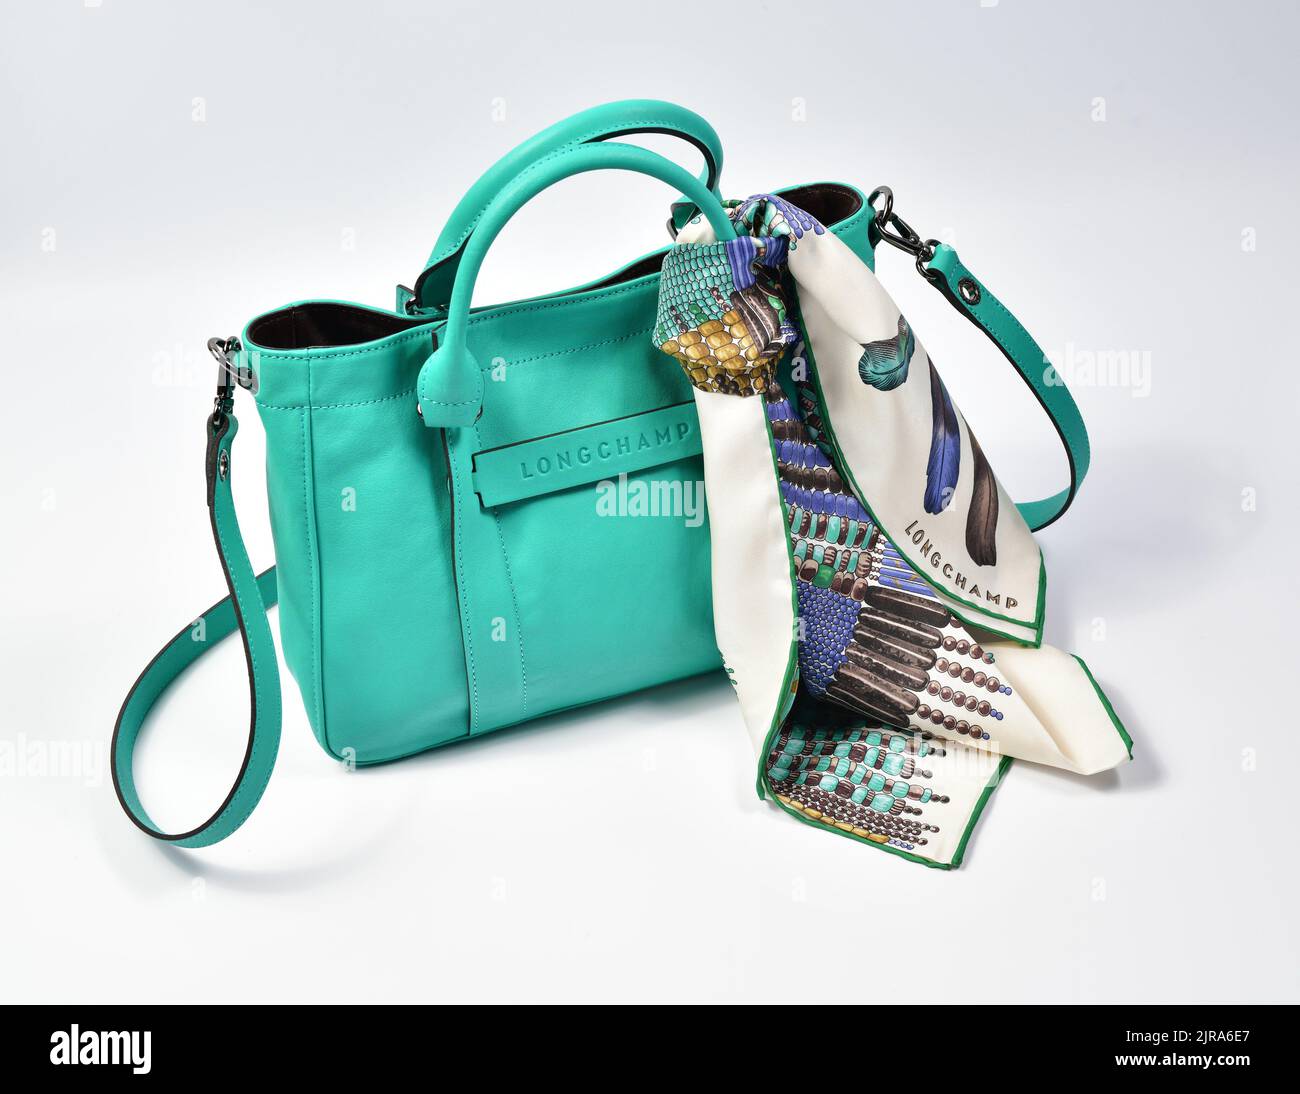 Green leather Longchamp purse and matching scarf Stock Photo